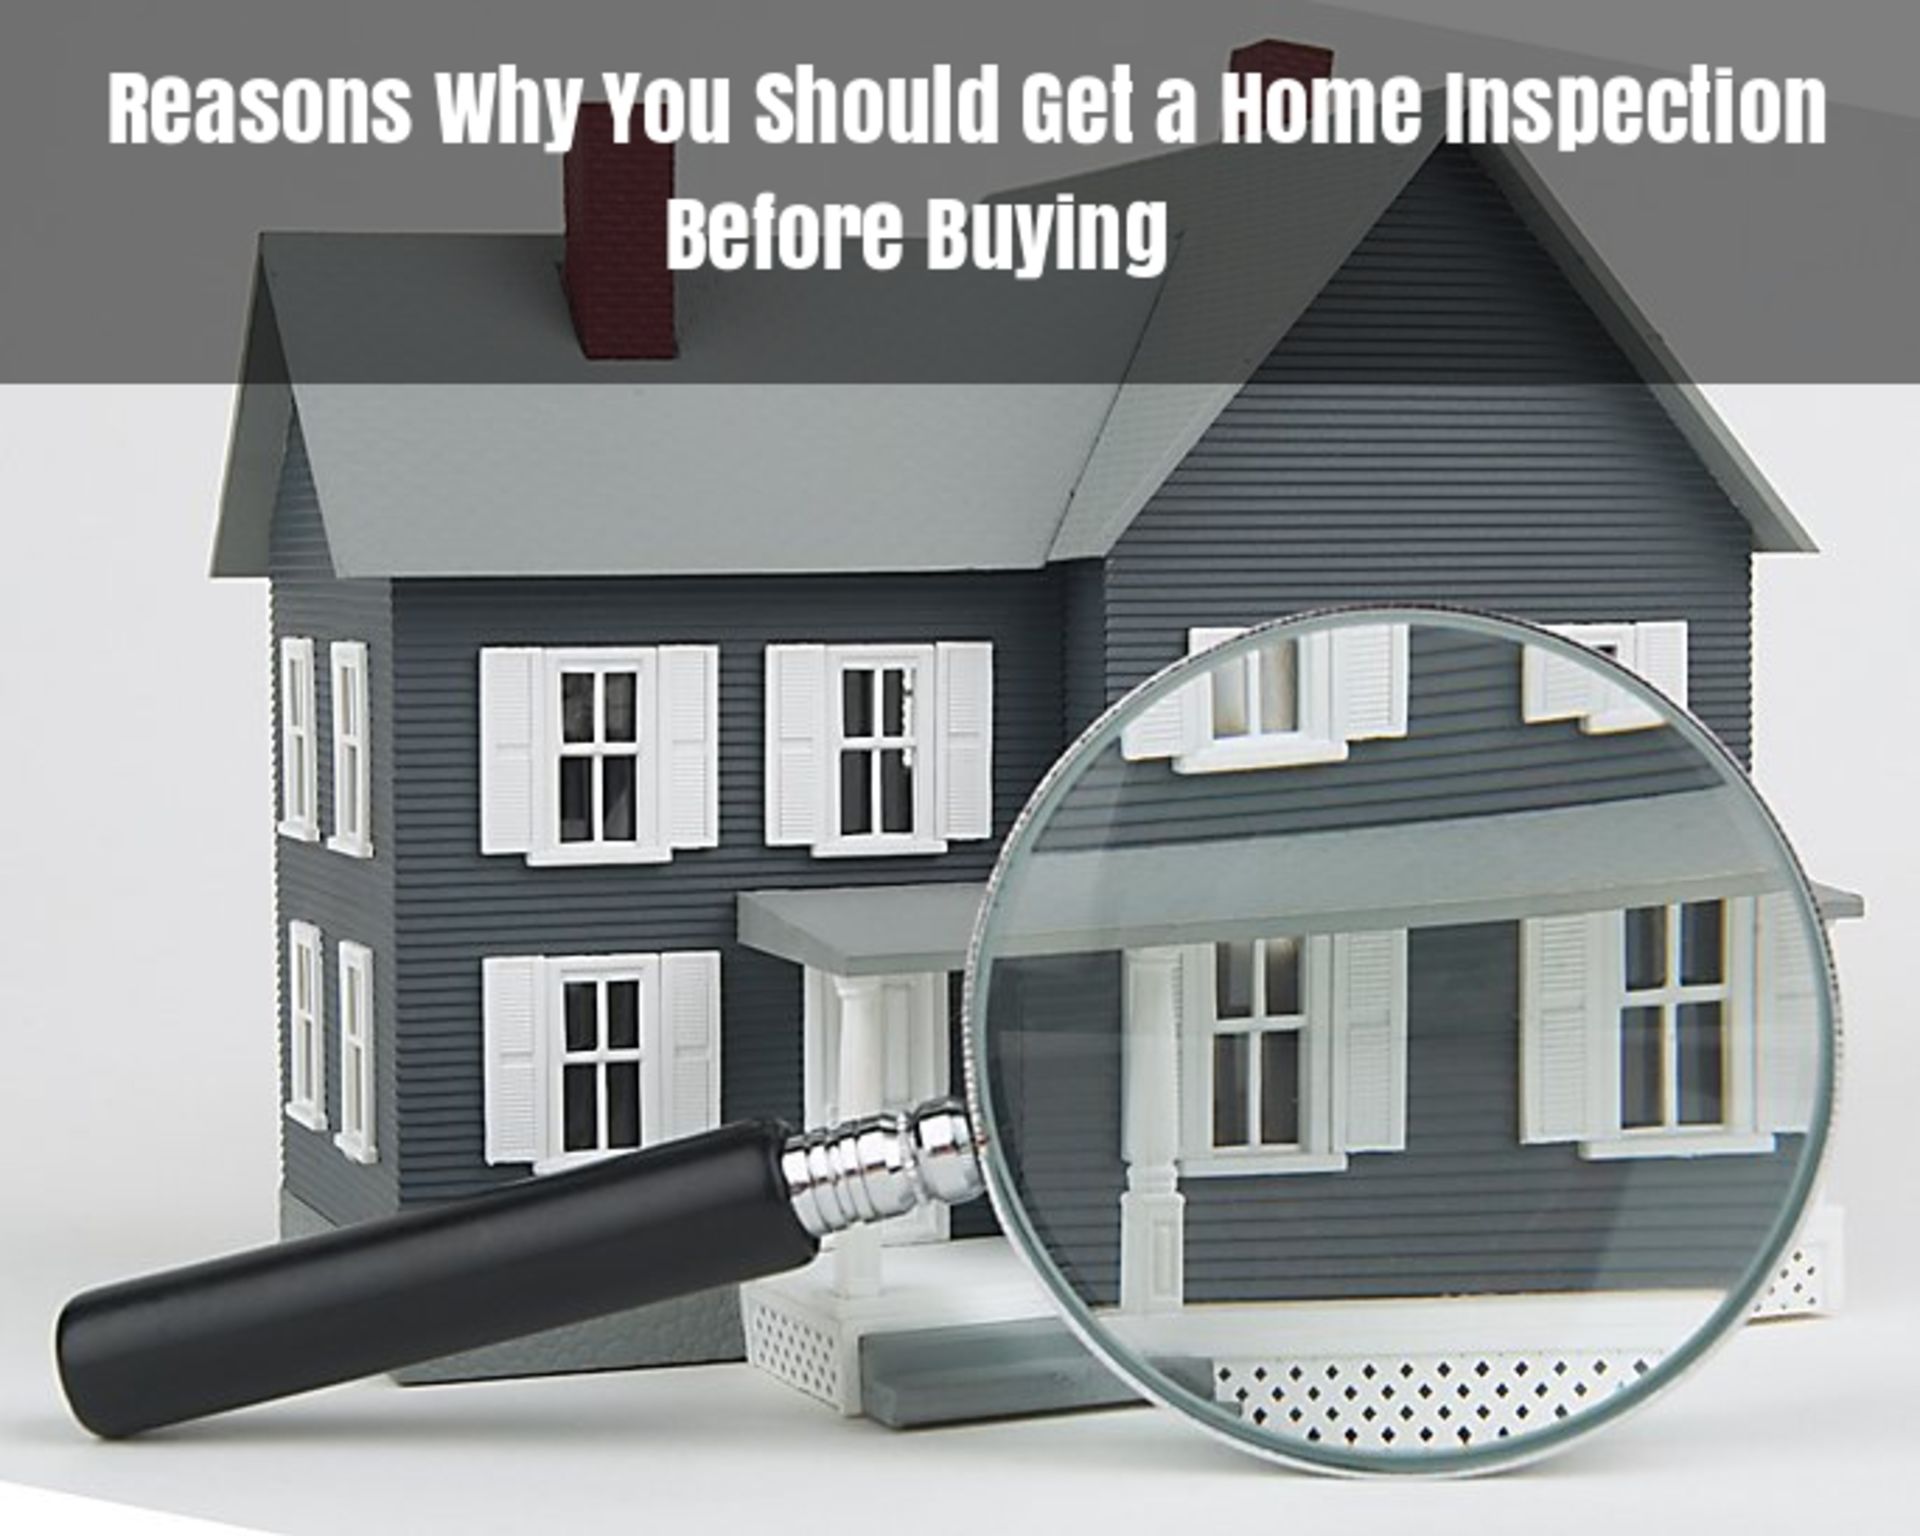 What Should A Home Inspection Include? - Propertynest in Mundijong Australia 2023 thumbnail